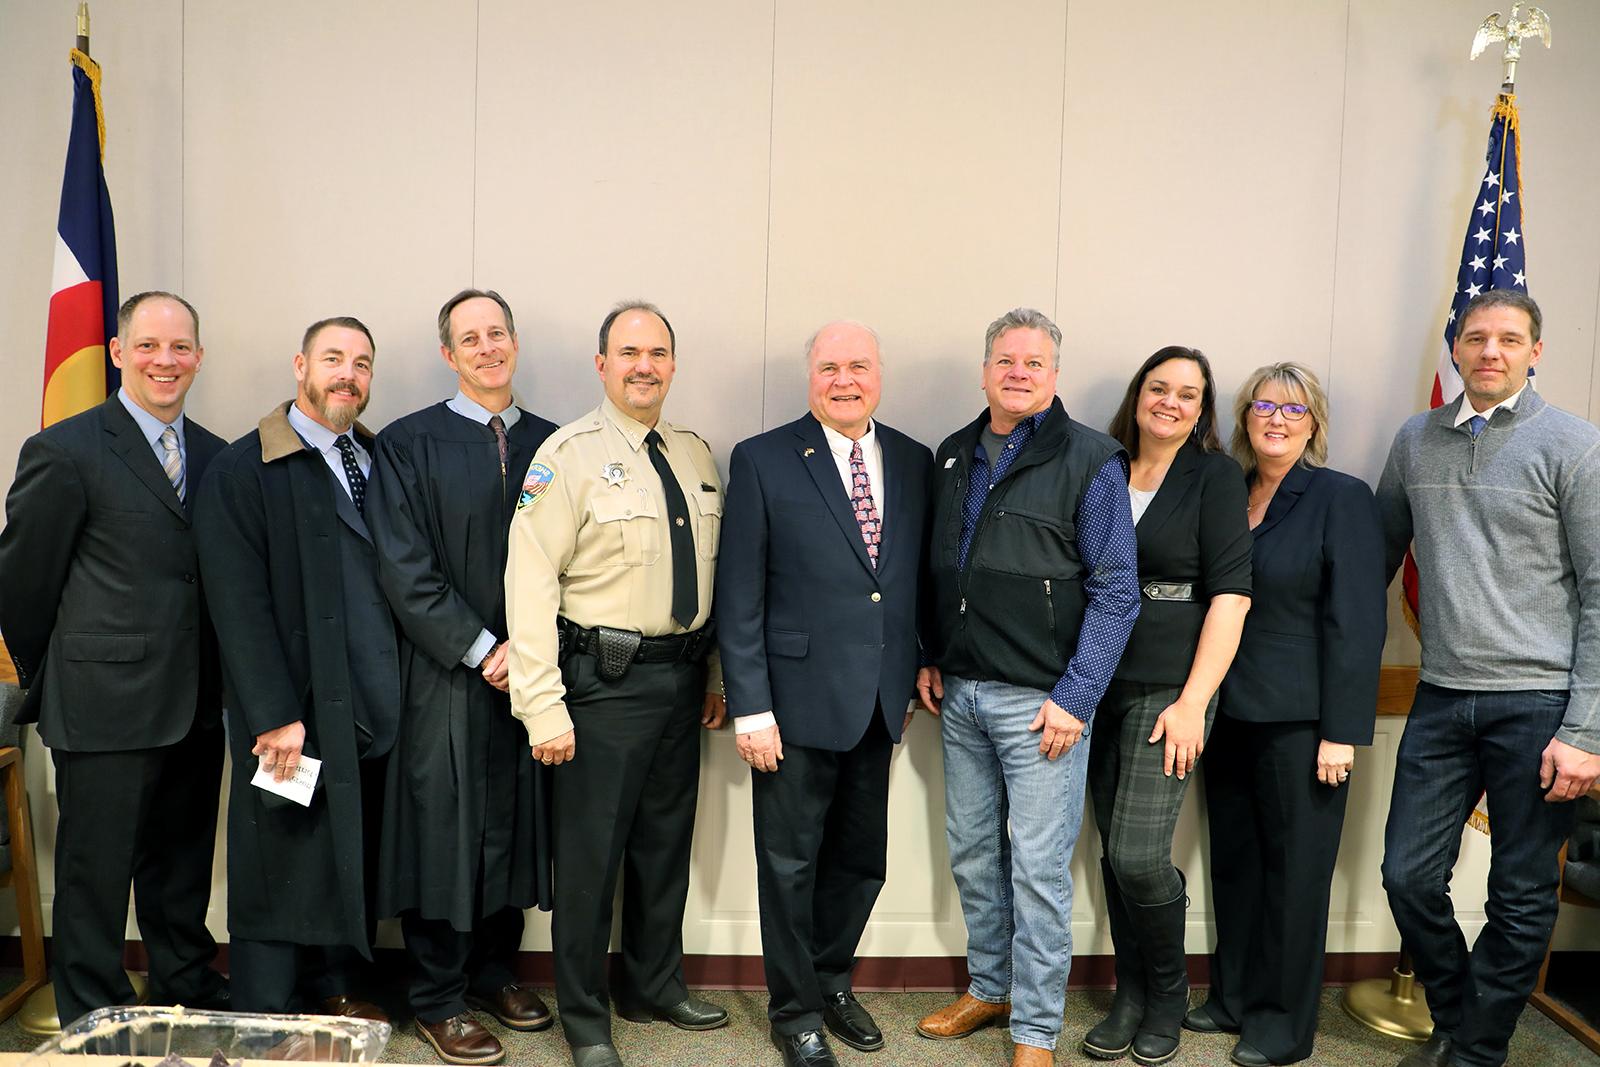 Garfield County's elected officials pose with Ninth Judicial District Judge John Neiley. Shown are Garfield County Assessor Jim Yellico, Clerk and Recorder Jackie Harmon, Treasurer Carrie Couey, Surveyor Scott Aibner, District 1 Commissioner Tom Jankovsky, Sheriff Lou Vallario, Judge Neiley, District Attorney Jeff Cheney, and Coroner Rob Glassmire.